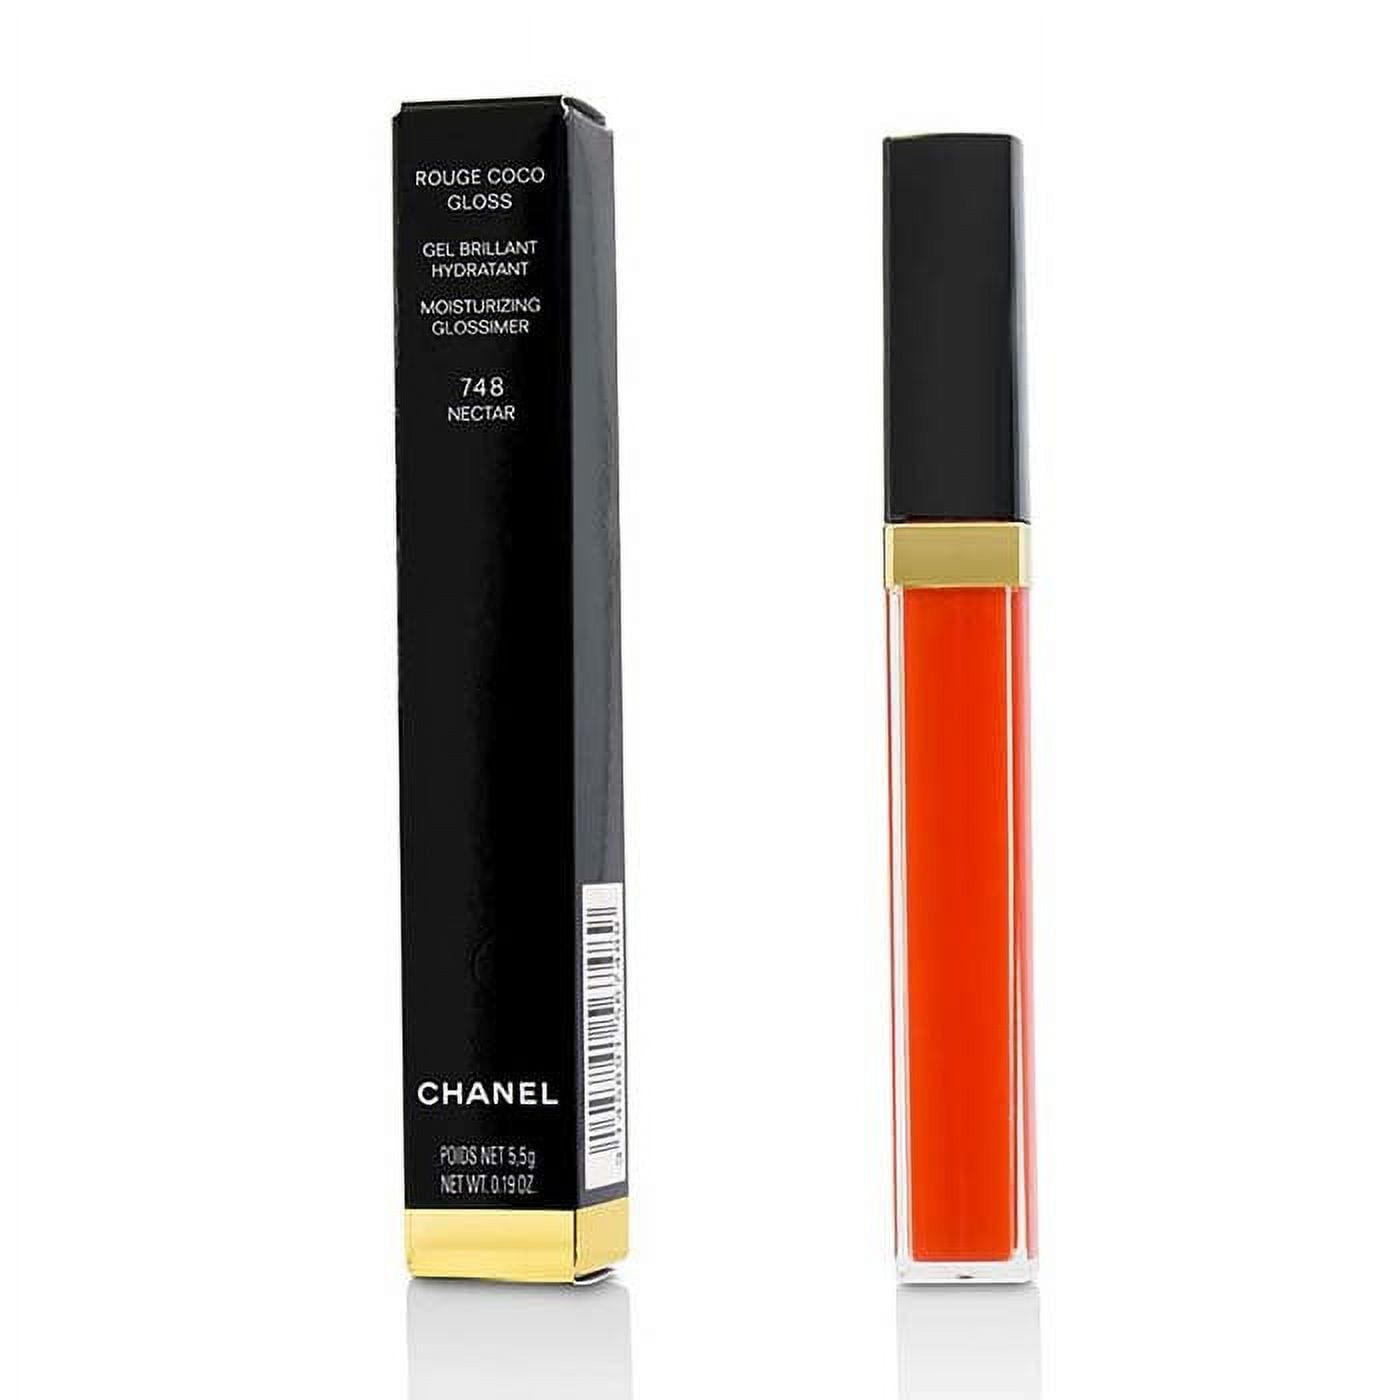 NORDSTROM - CHANEL SHEER LIP GLOSS SET BACK IN STOCK - The Freebie